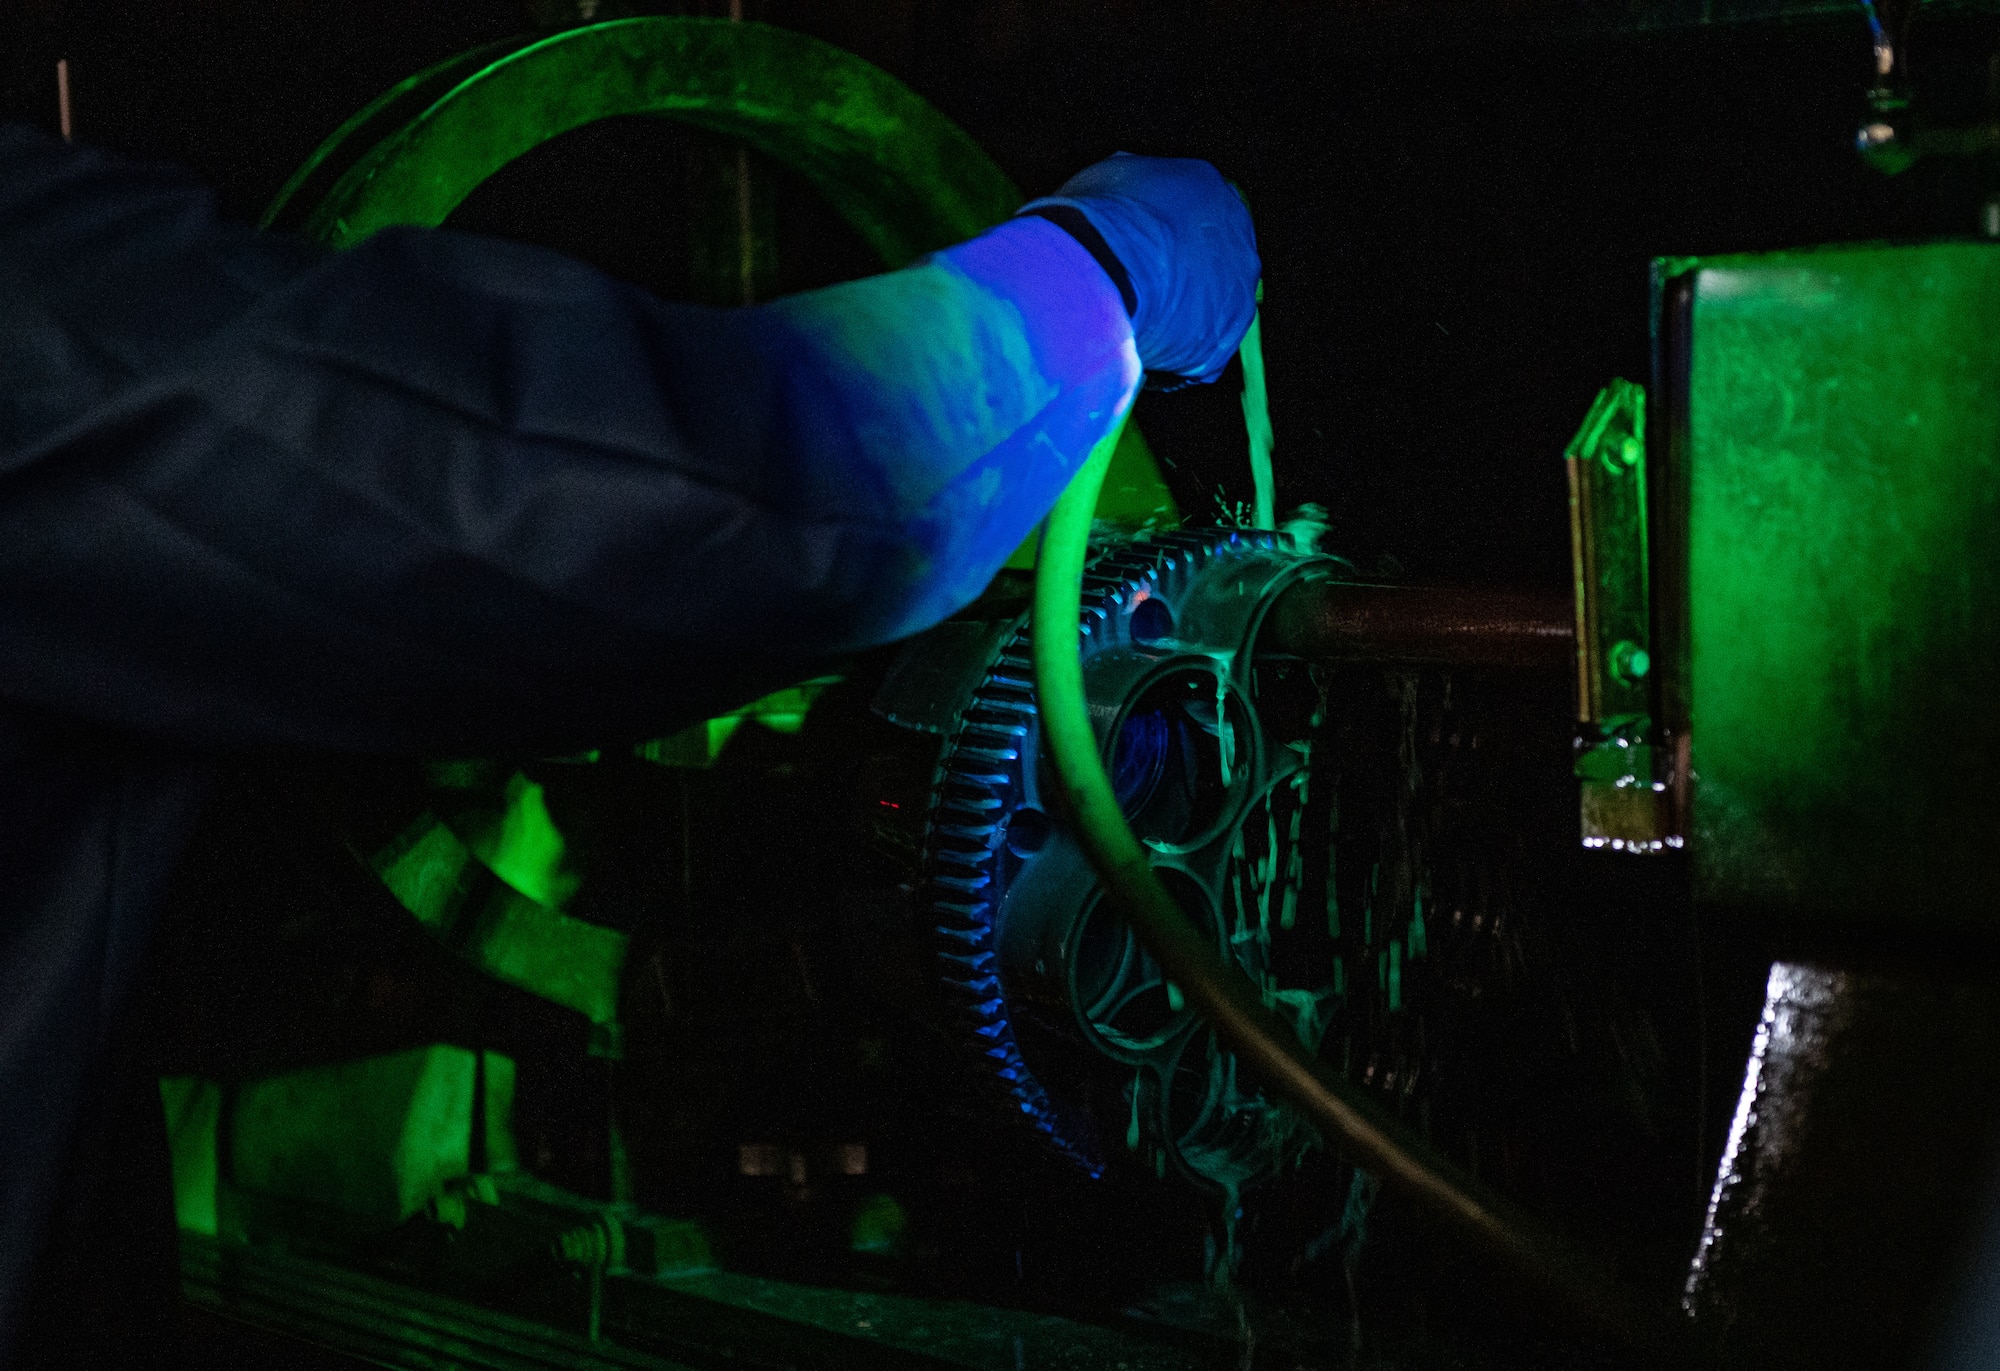 U.S. Air Force Airman 1st Class Jamorris Lewis, a 23rd Maintenance Squadron nondestructive inspection apprentice, accomplishes a magnetic particle inspection on an A-10 Thunderbolt II GAU-8 weapons system part at Moody Air Force Base, Georgia, April 5, 2022. The fluorescent dye penetrant glows under blacklight, which can show minute imperfections in the system that over time would lead to a part failure. (U.S. Air Force photo by Staff Sgt. Melanie A. Bulow-Gonterman)